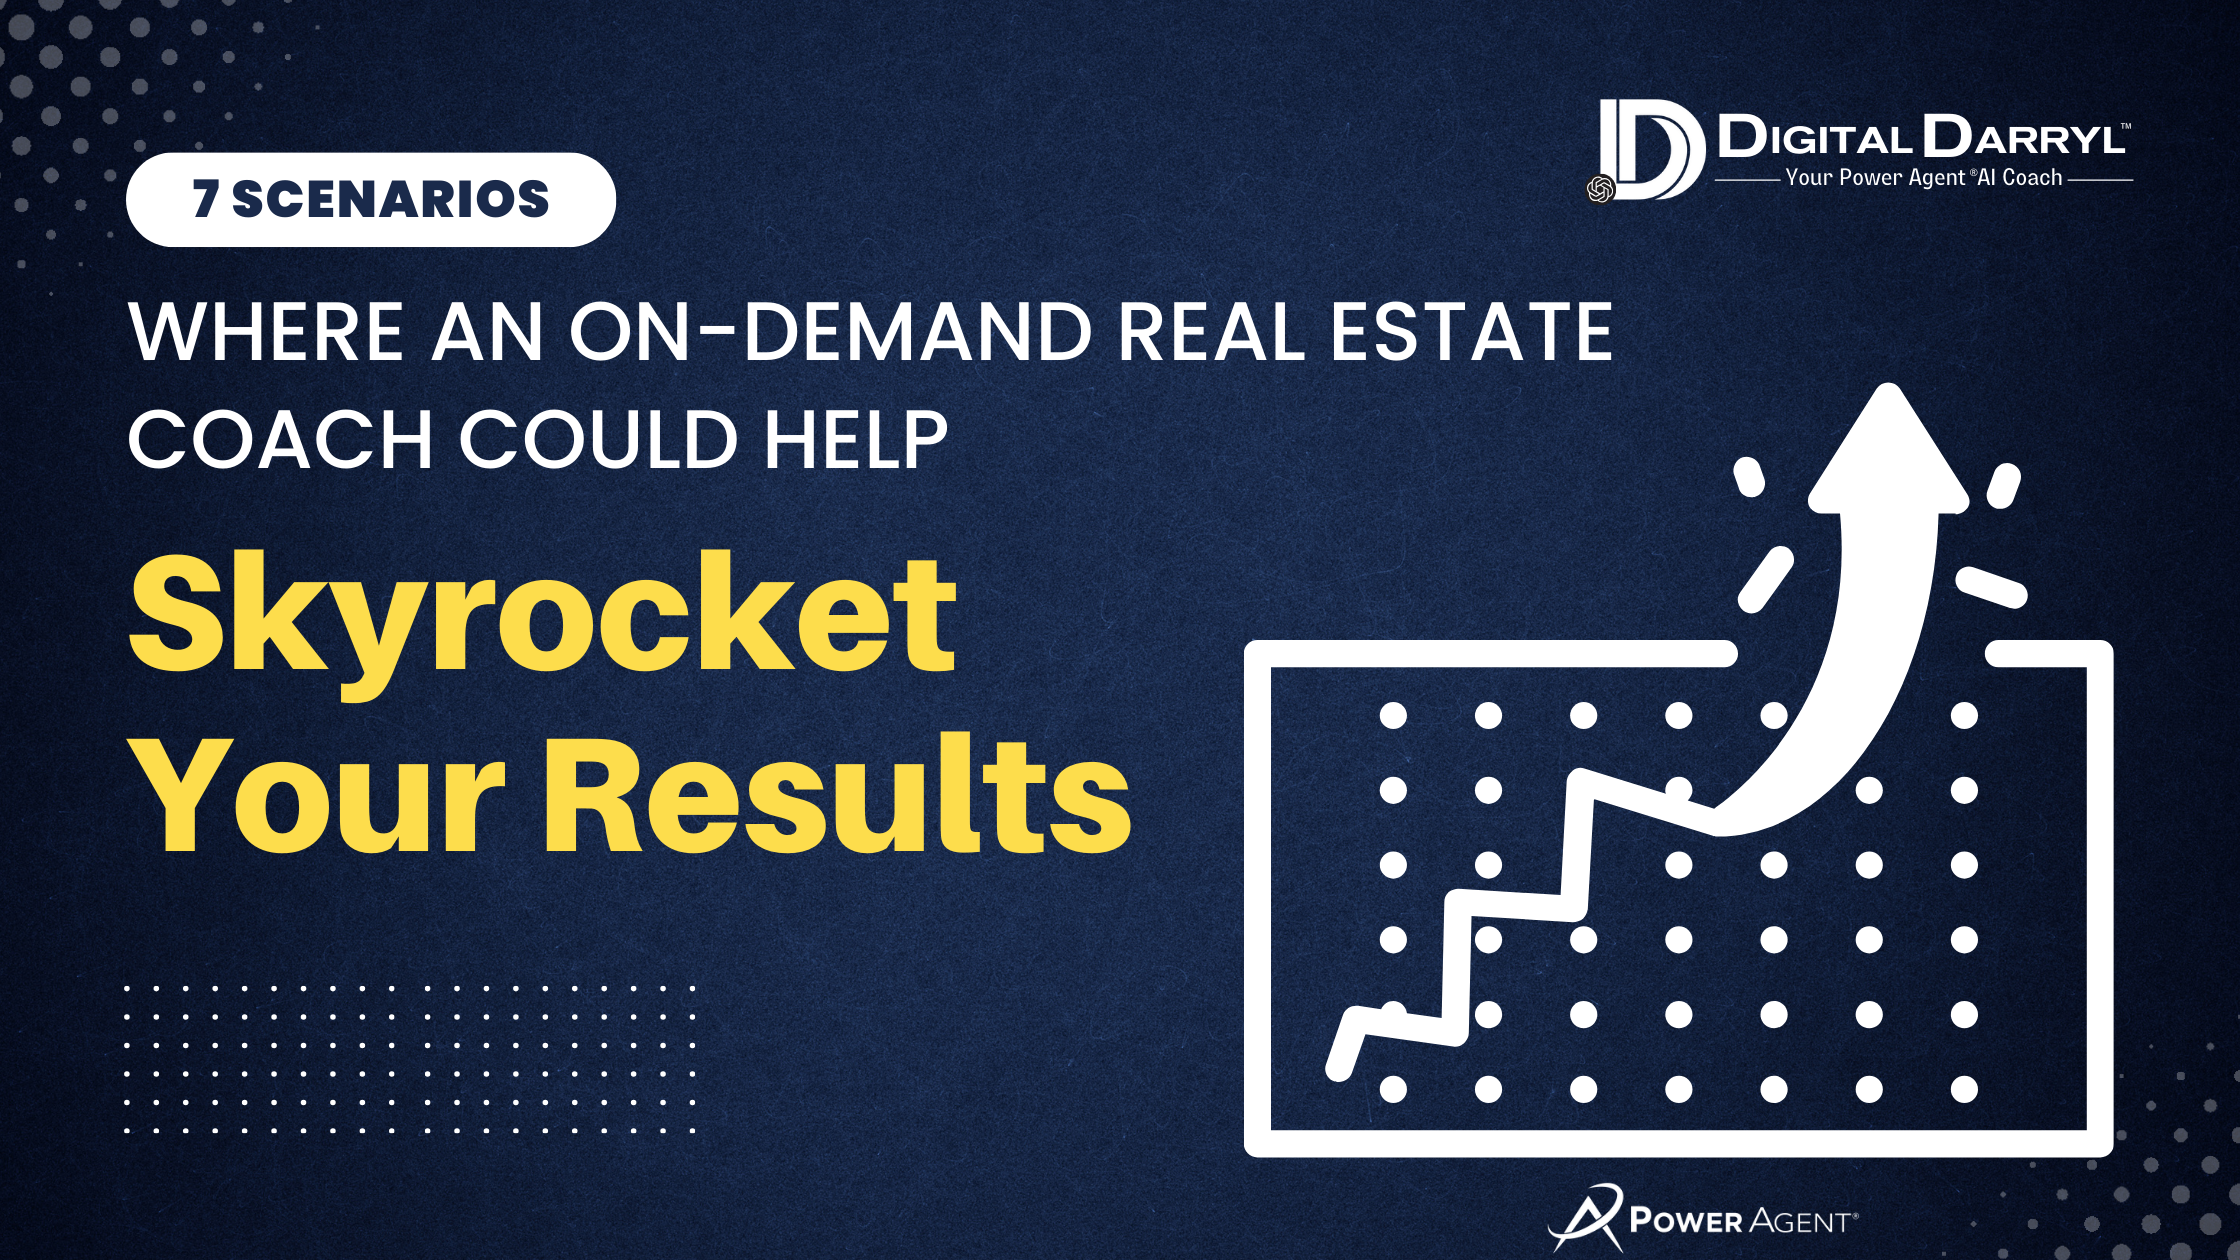 7 Scenarios Where an On-Demand Real Estate Coach Could Help Skyrocket Your Results